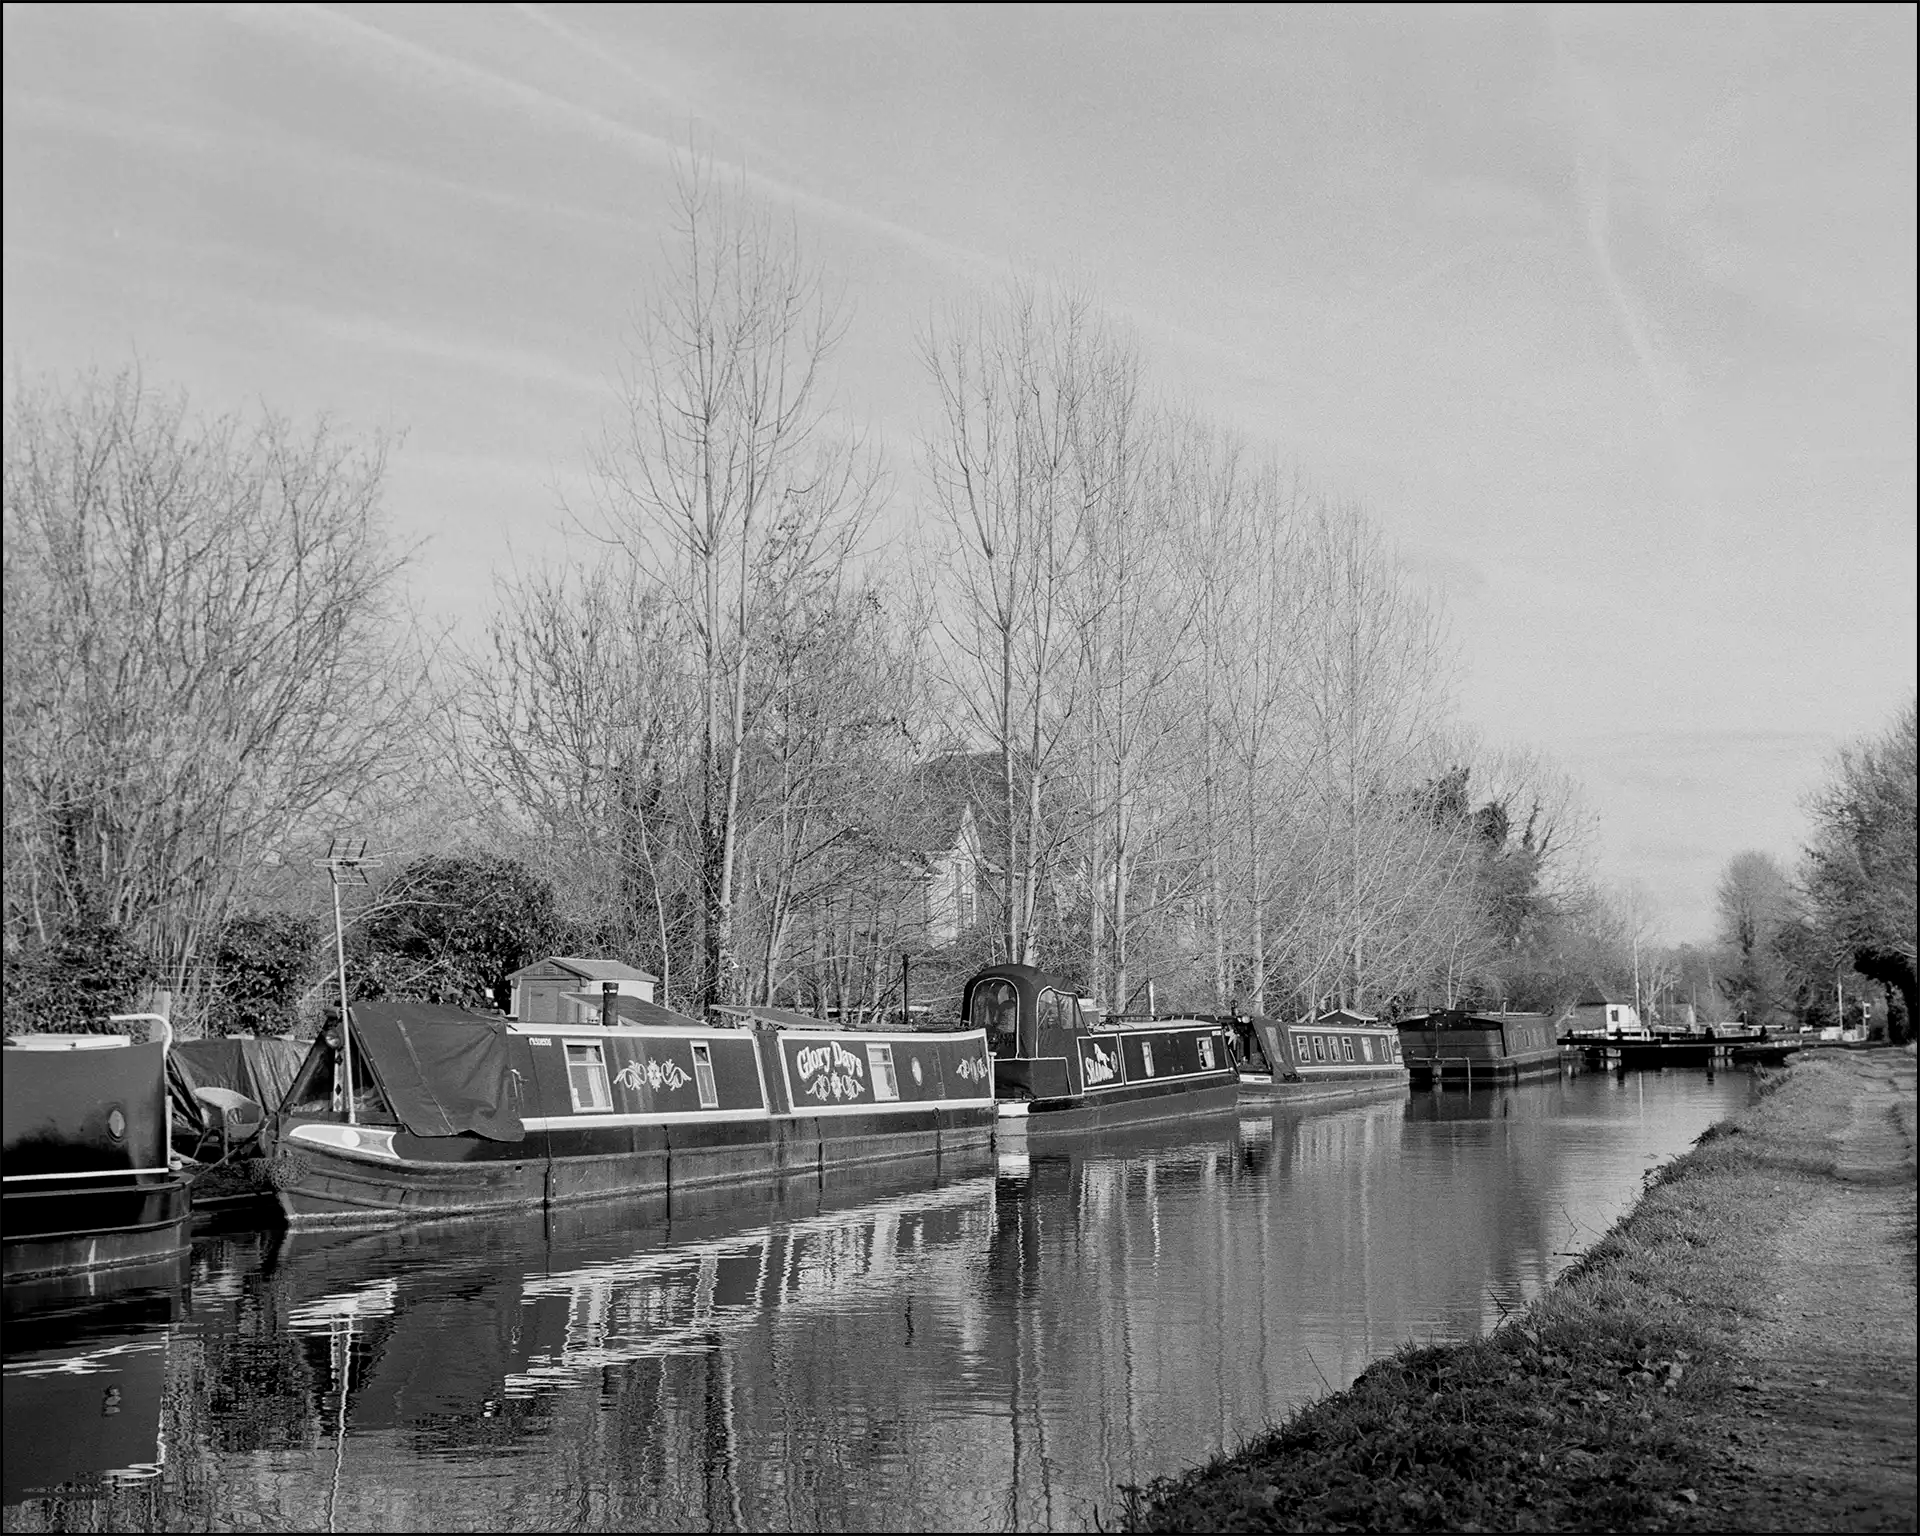 Kentmere Film Pan 400 on the Kennet and Avon Canal